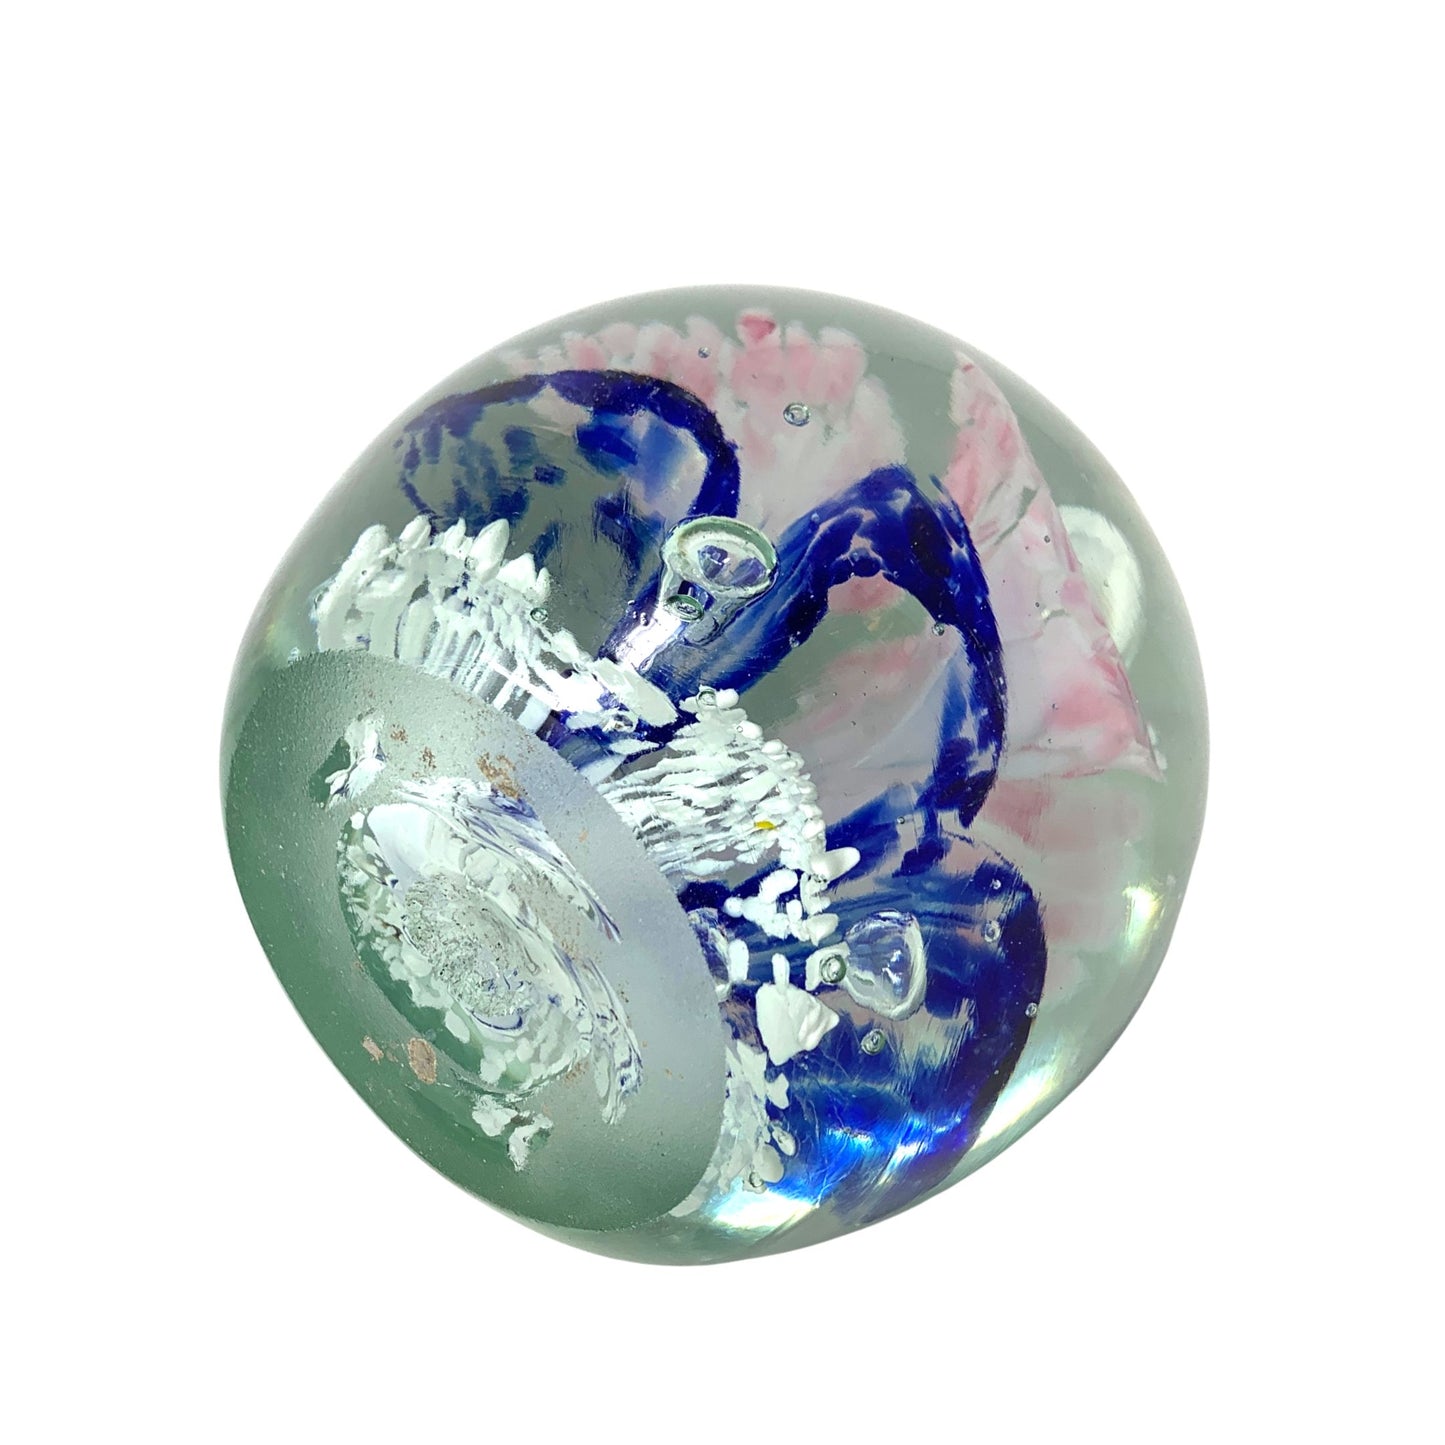 Large 5" Art Glass Paperweight